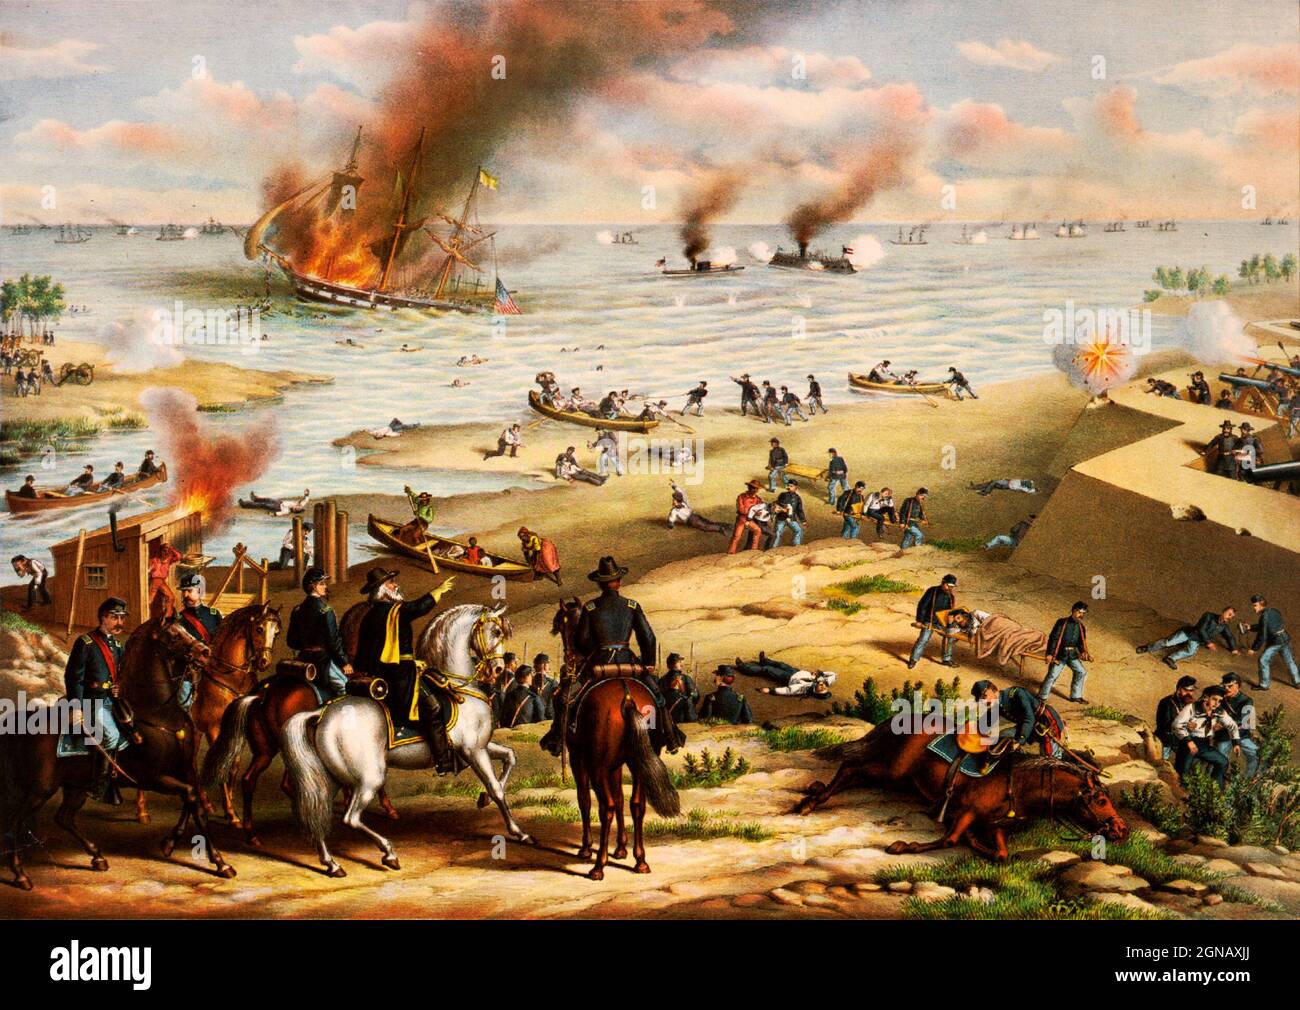 Battle of the Monitor and Merrimack, also called Battle of Hampton Roads, (March 9, 1862), in the American Civil War, naval engagement at Hampton Roads, Virginia, a harbour at the mouth of the James River, notable as history's first duel between ironclad warships and the beginning of a new era of naval warfare. by Kurz and Allison Stock Photo